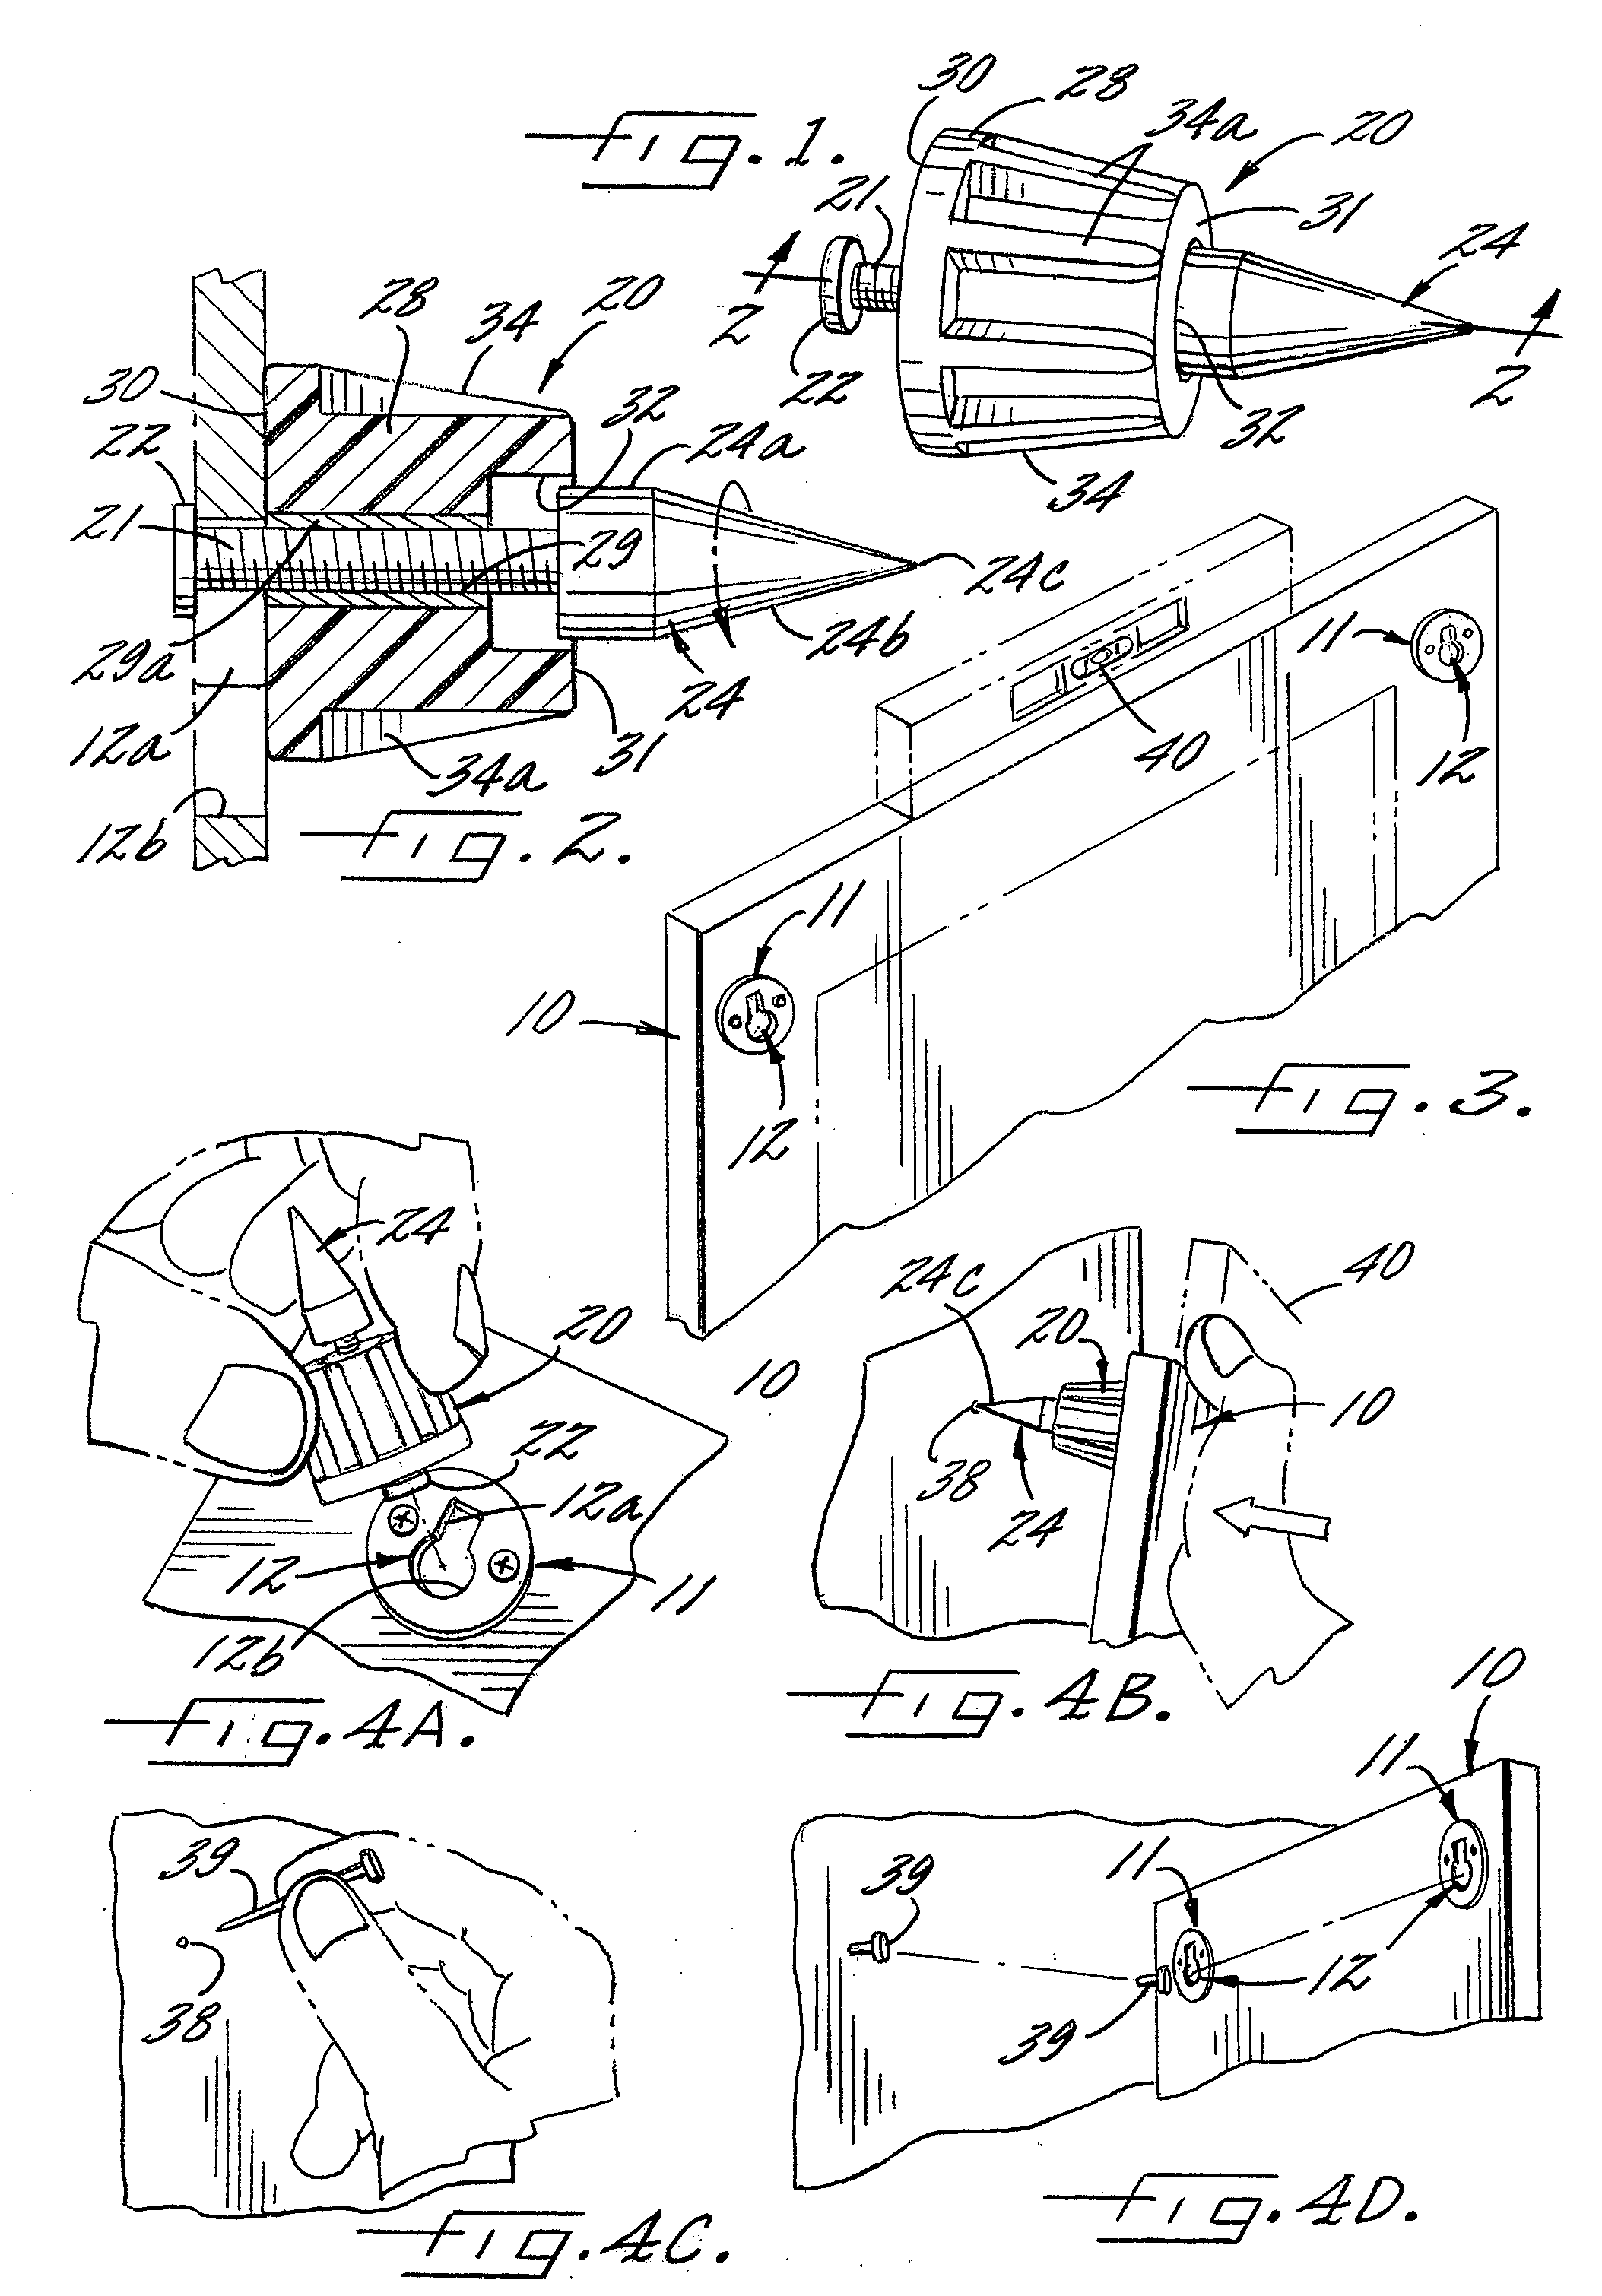 Position marking device for slot hangers